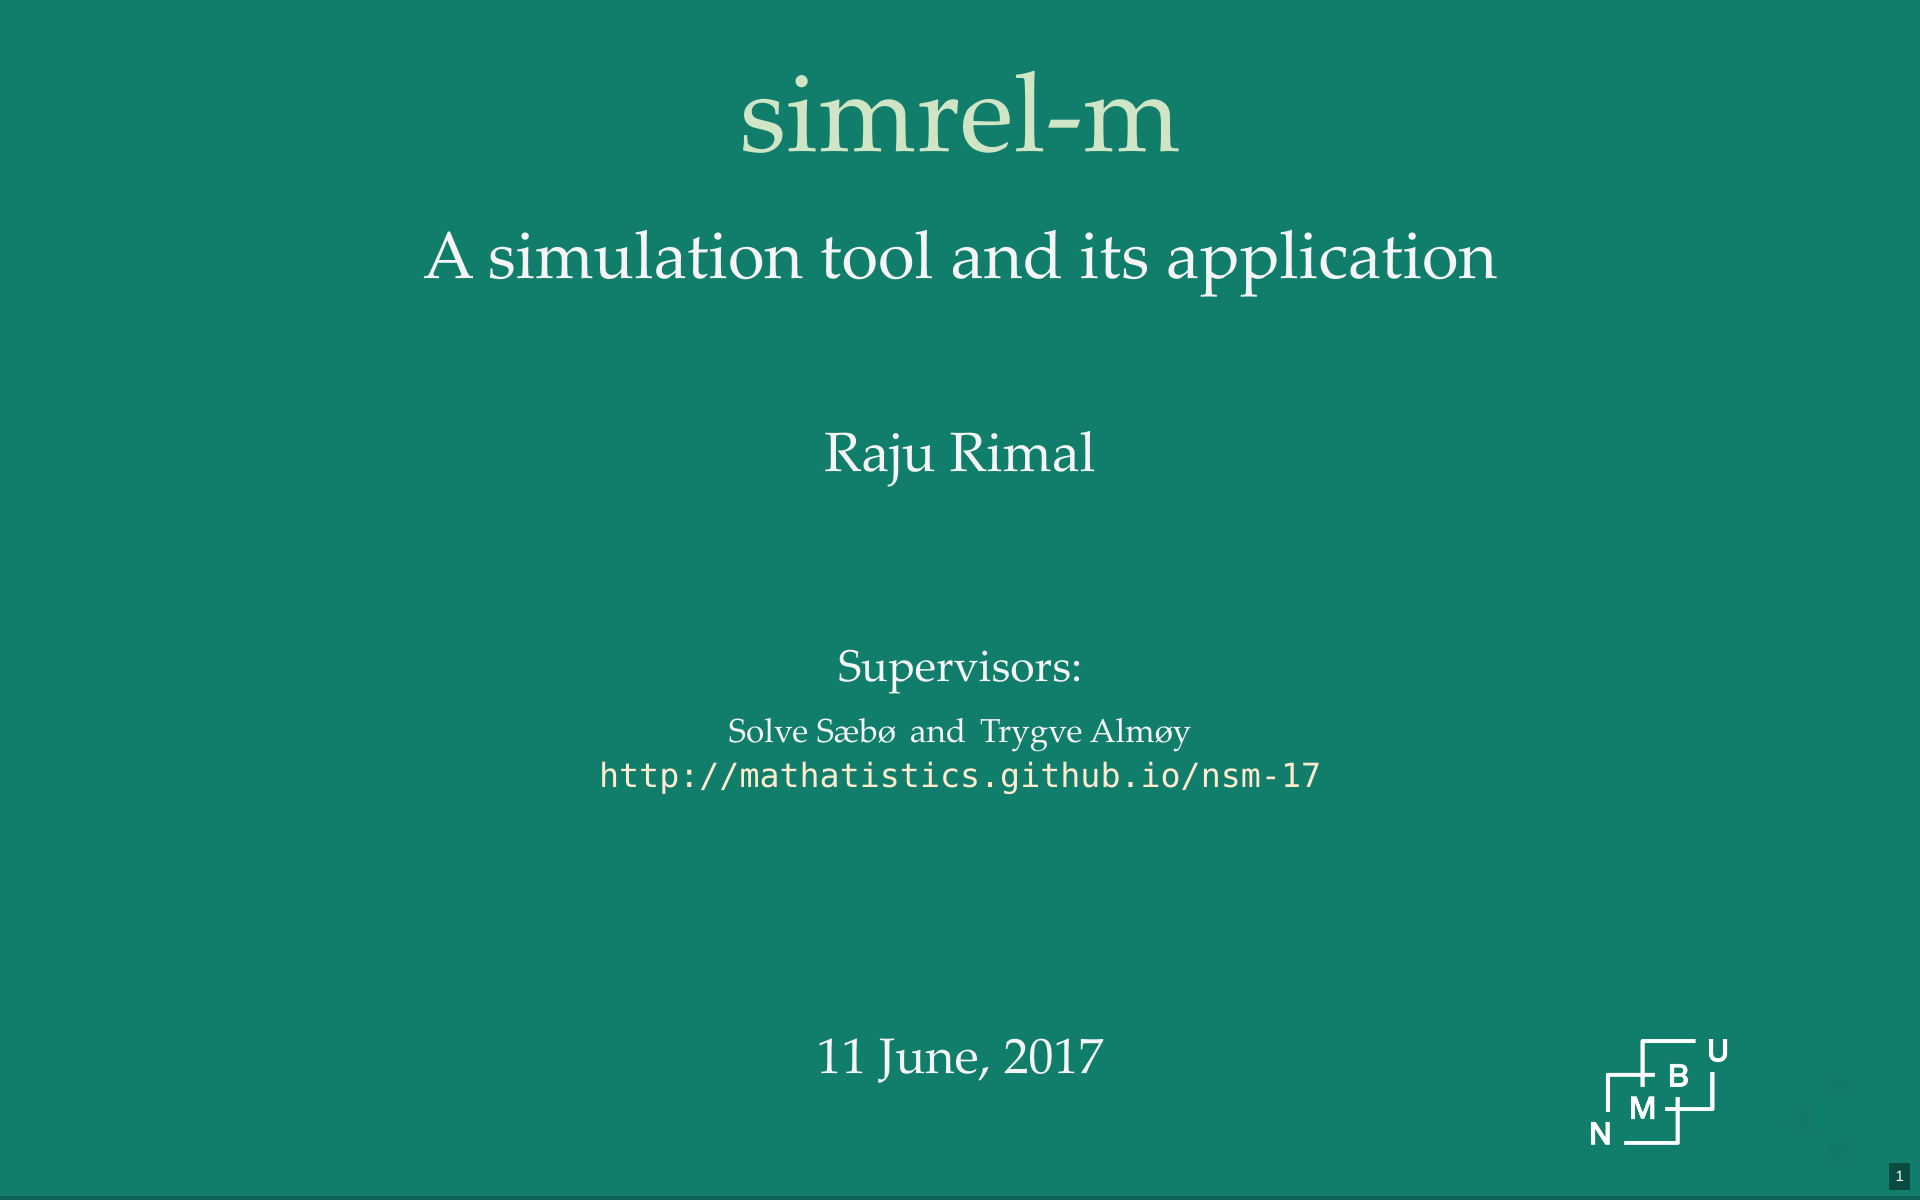 Simrel-M: A simulation tool and its application